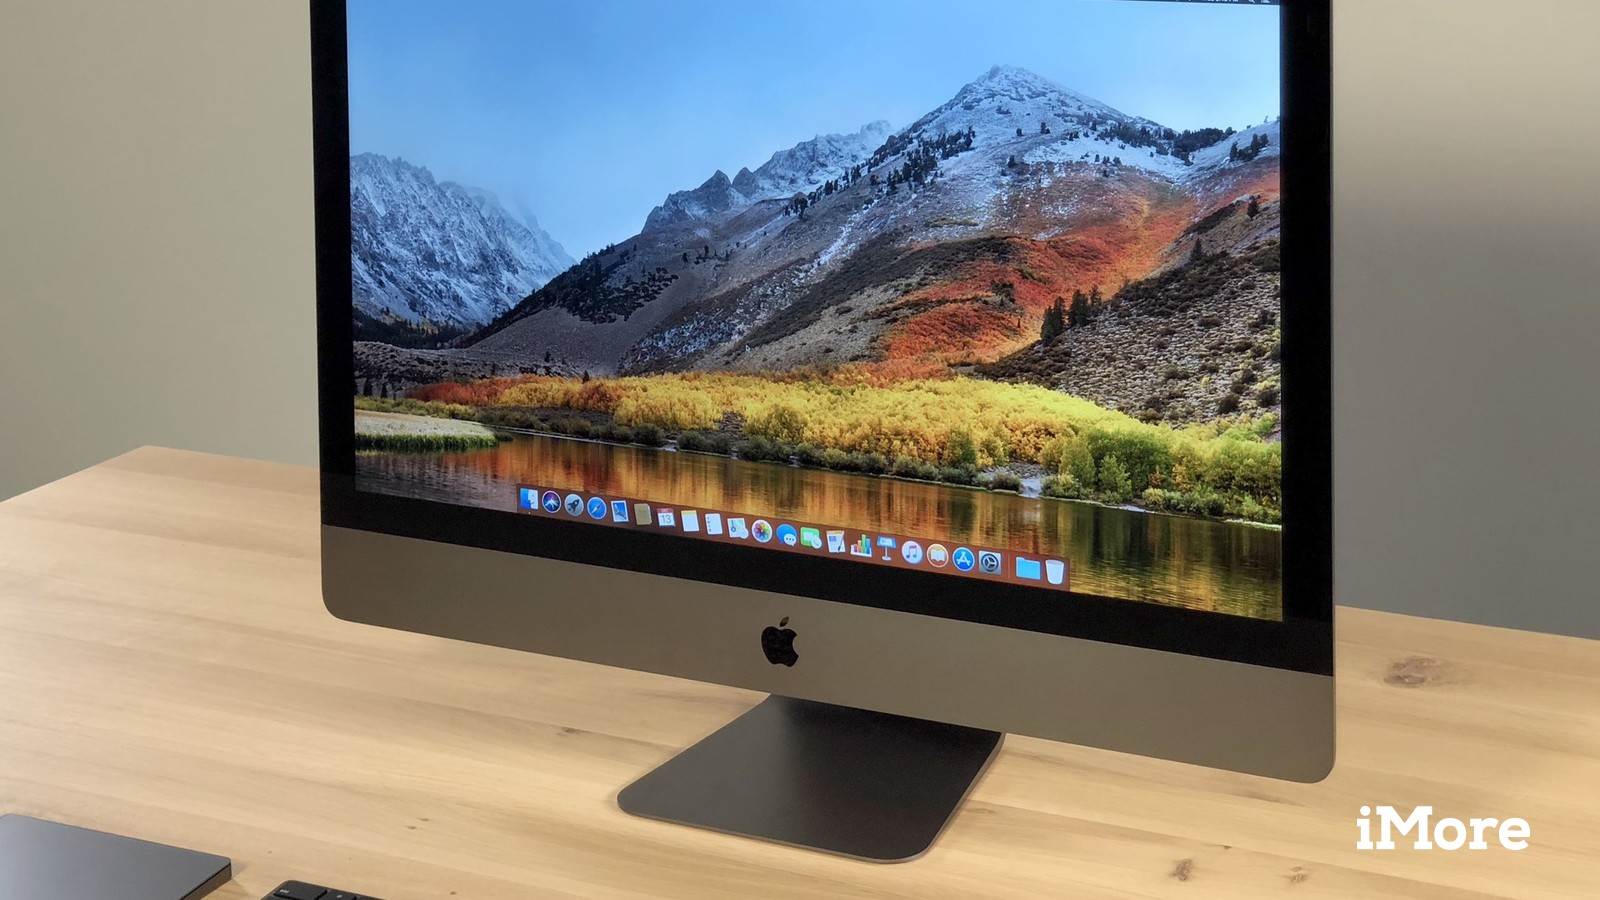 Best Price For New Mac 21.5 2018